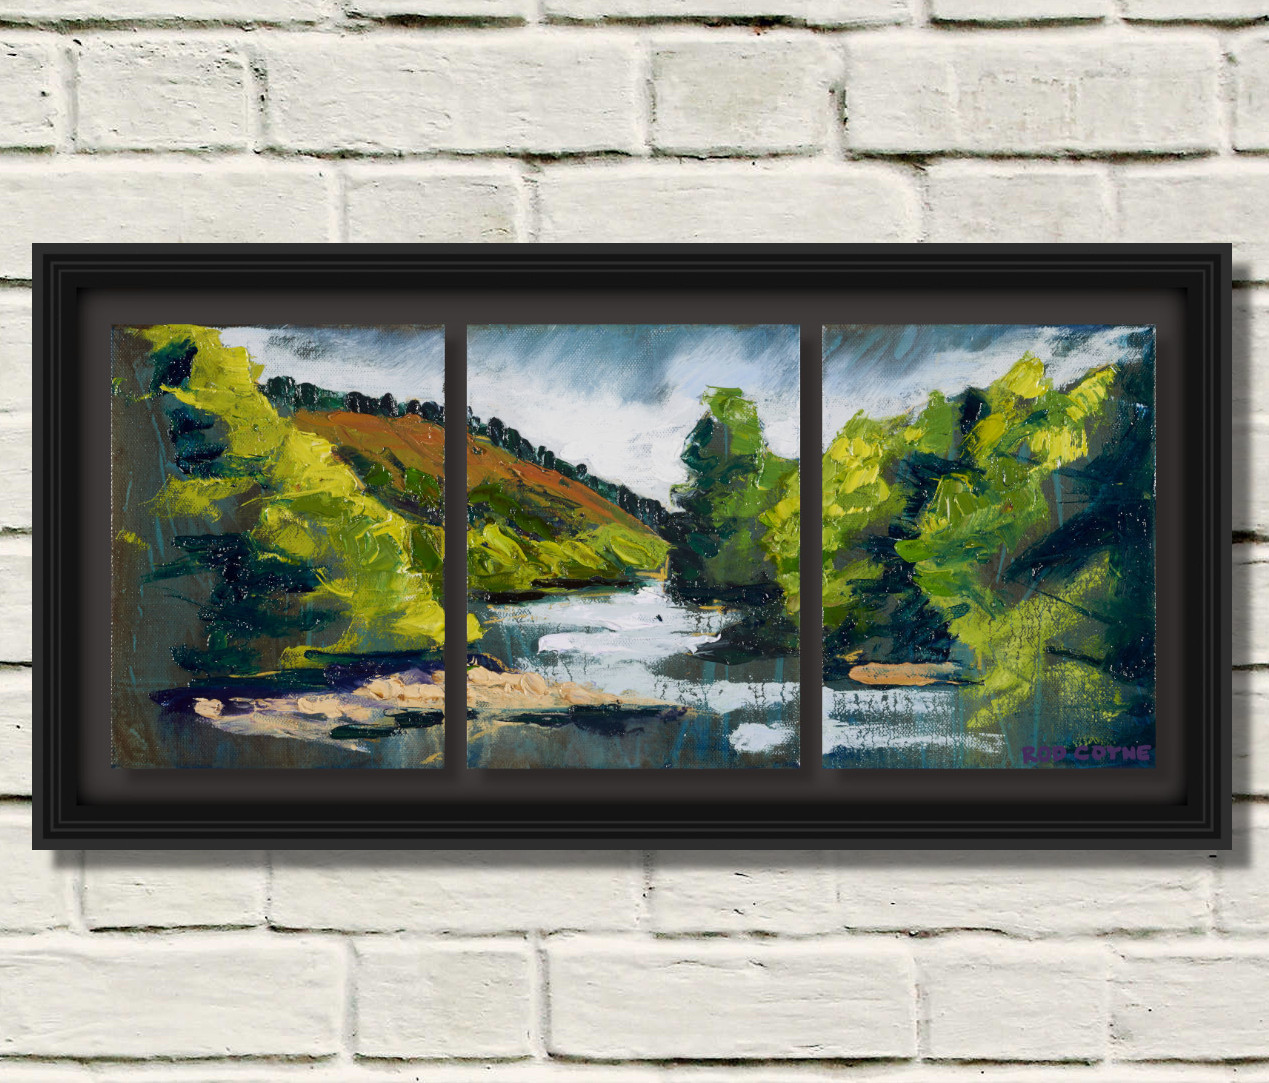 artist rod coyne's triptych painting "summer solstice meeting of the waters" is shown here in a single black frame.